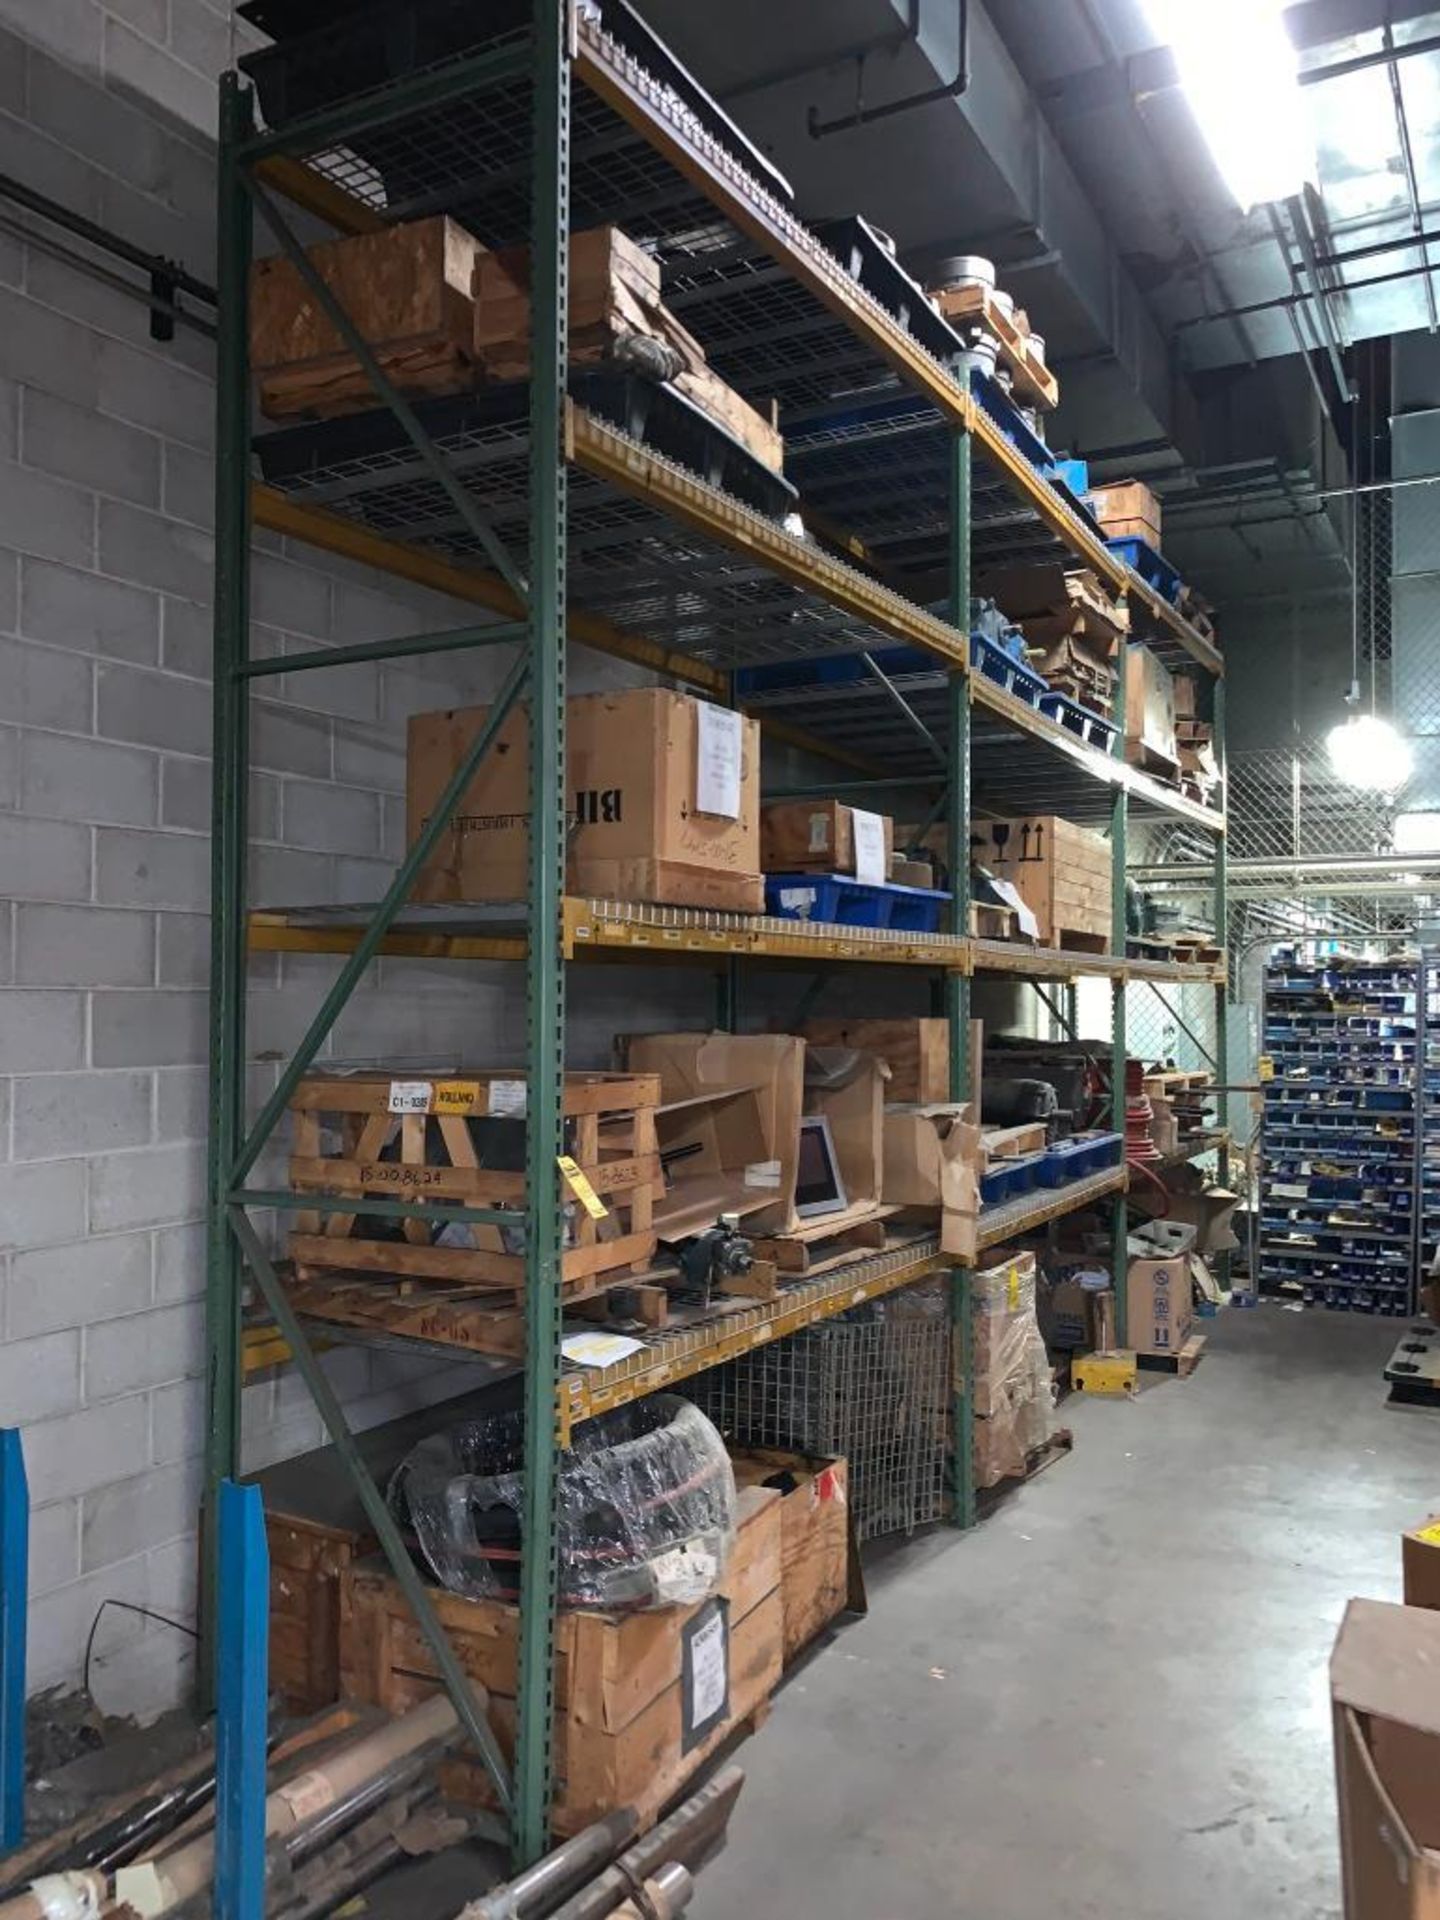 (5x) Bays of Assorted Pallet Rack w/ Content; Rollers, Hose, Electric Motors, Assorted Machine Parts